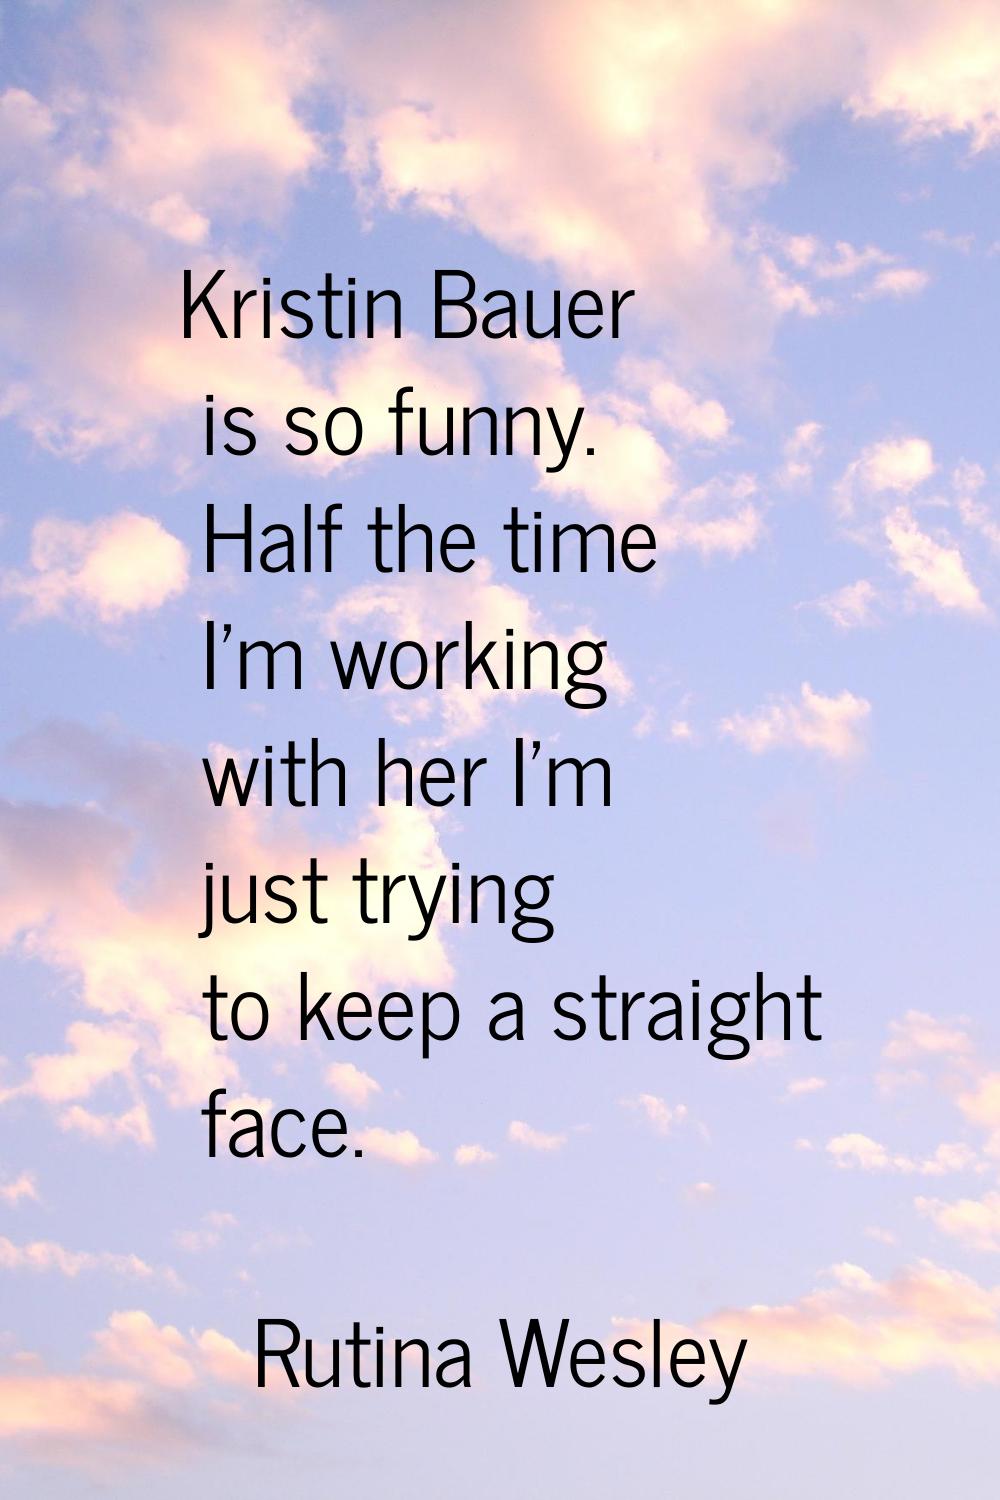 Kristin Bauer is so funny. Half the time I'm working with her I'm just trying to keep a straight fa